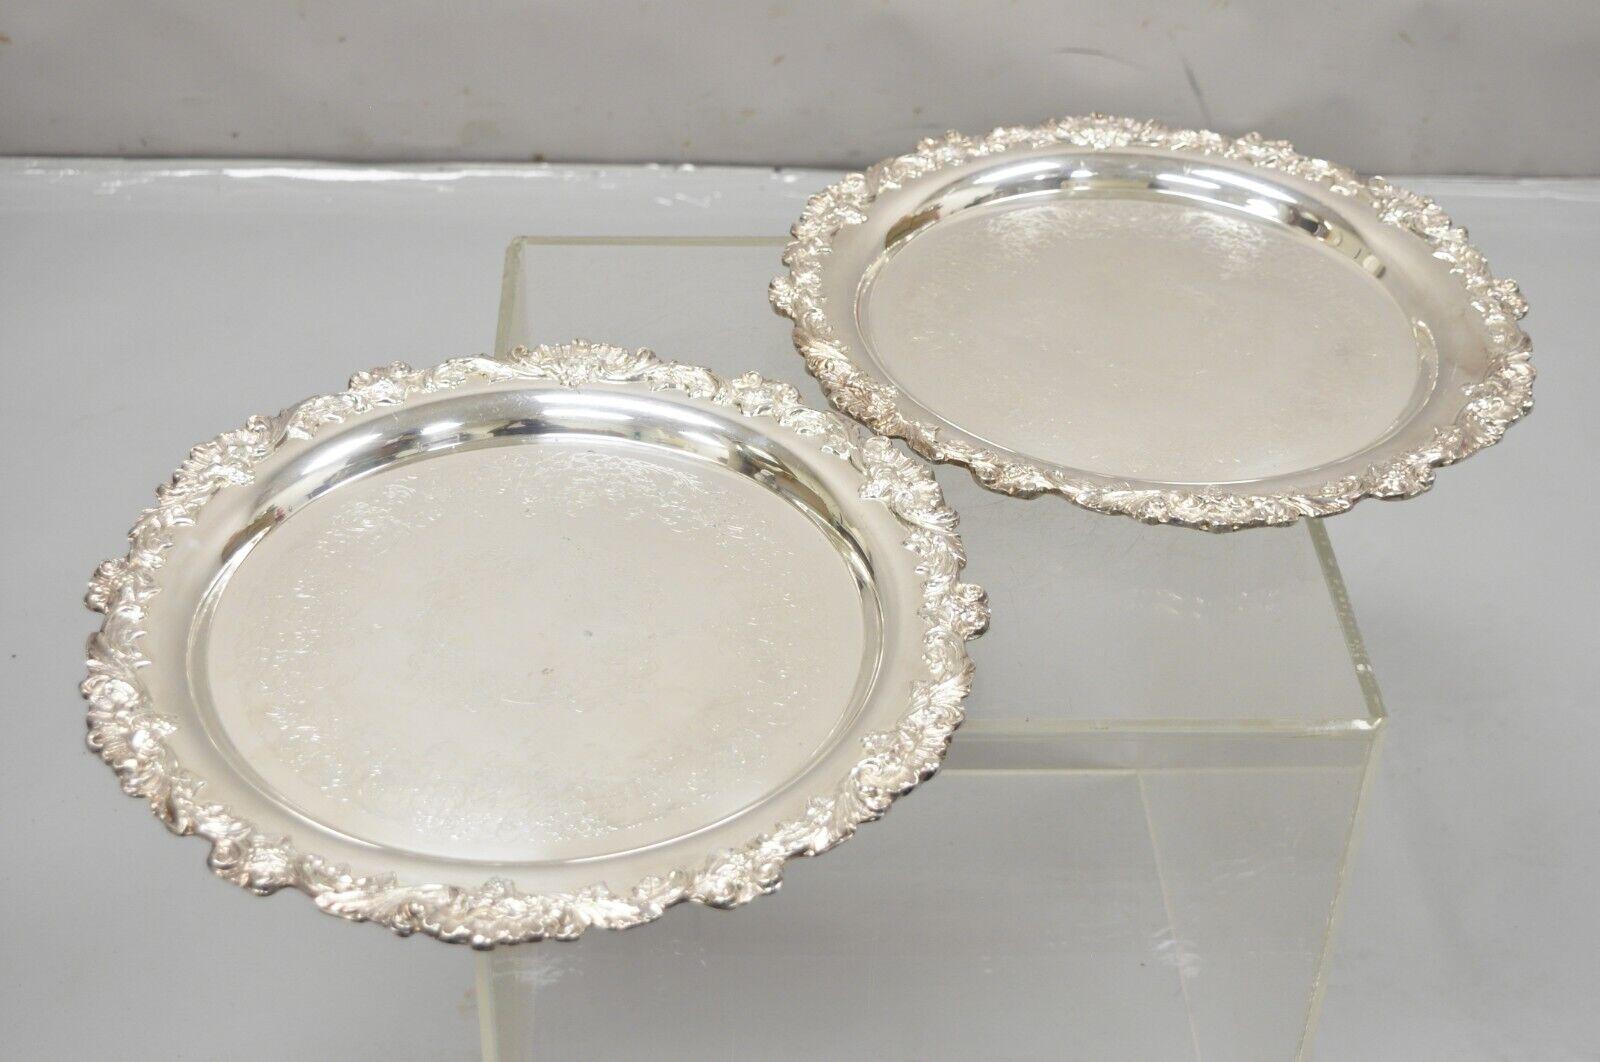 Vintage Pair Webster Wilcox International Silver Plated 16” Round Serving Platter Tray. Item features etched centers, ornate rim, original hallmark. Circa Mid 20th century. Measurements:  1